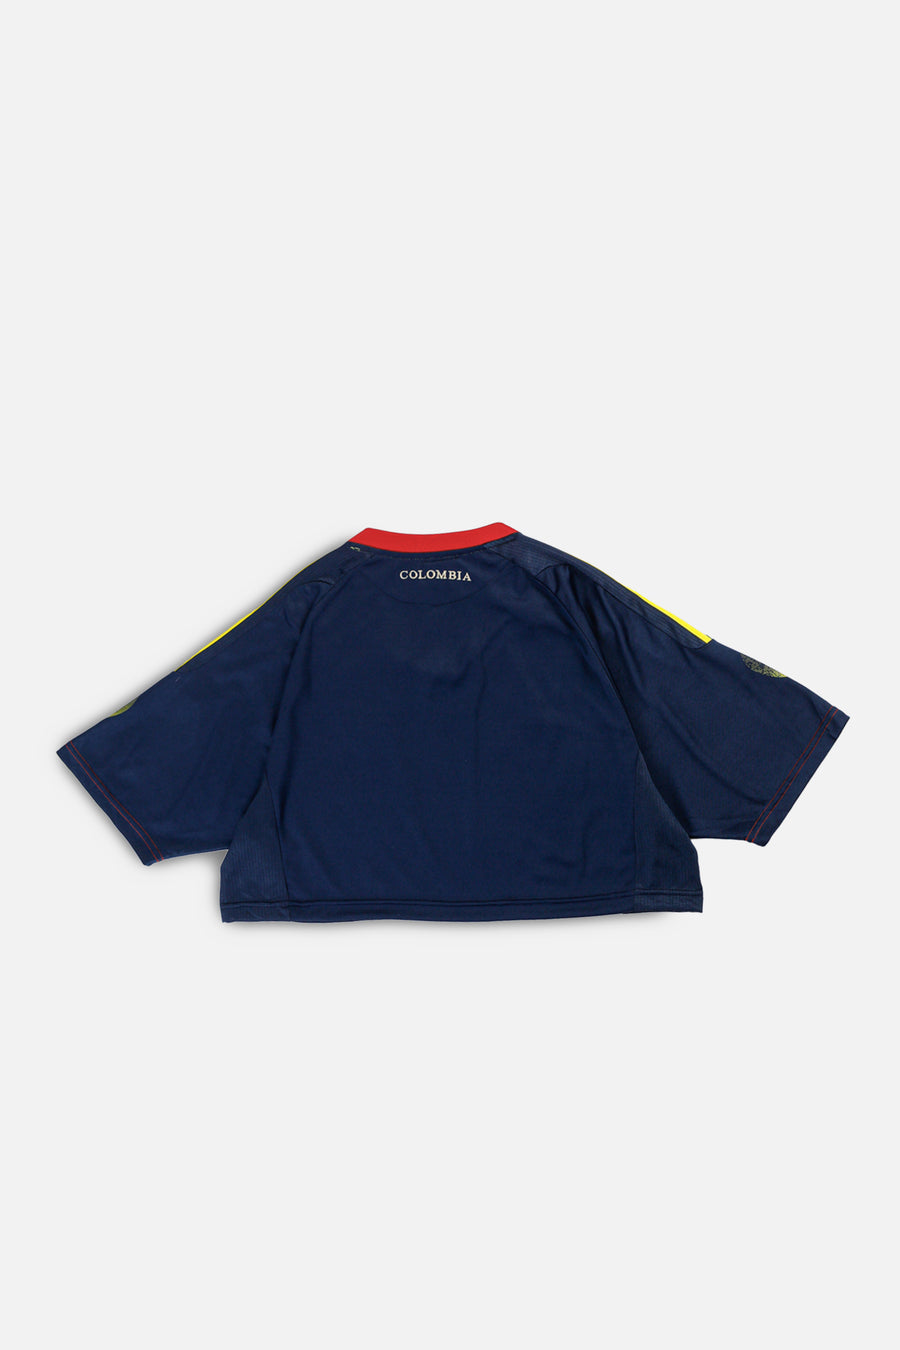 Rework Crop Colombia Soccer Jersey - L